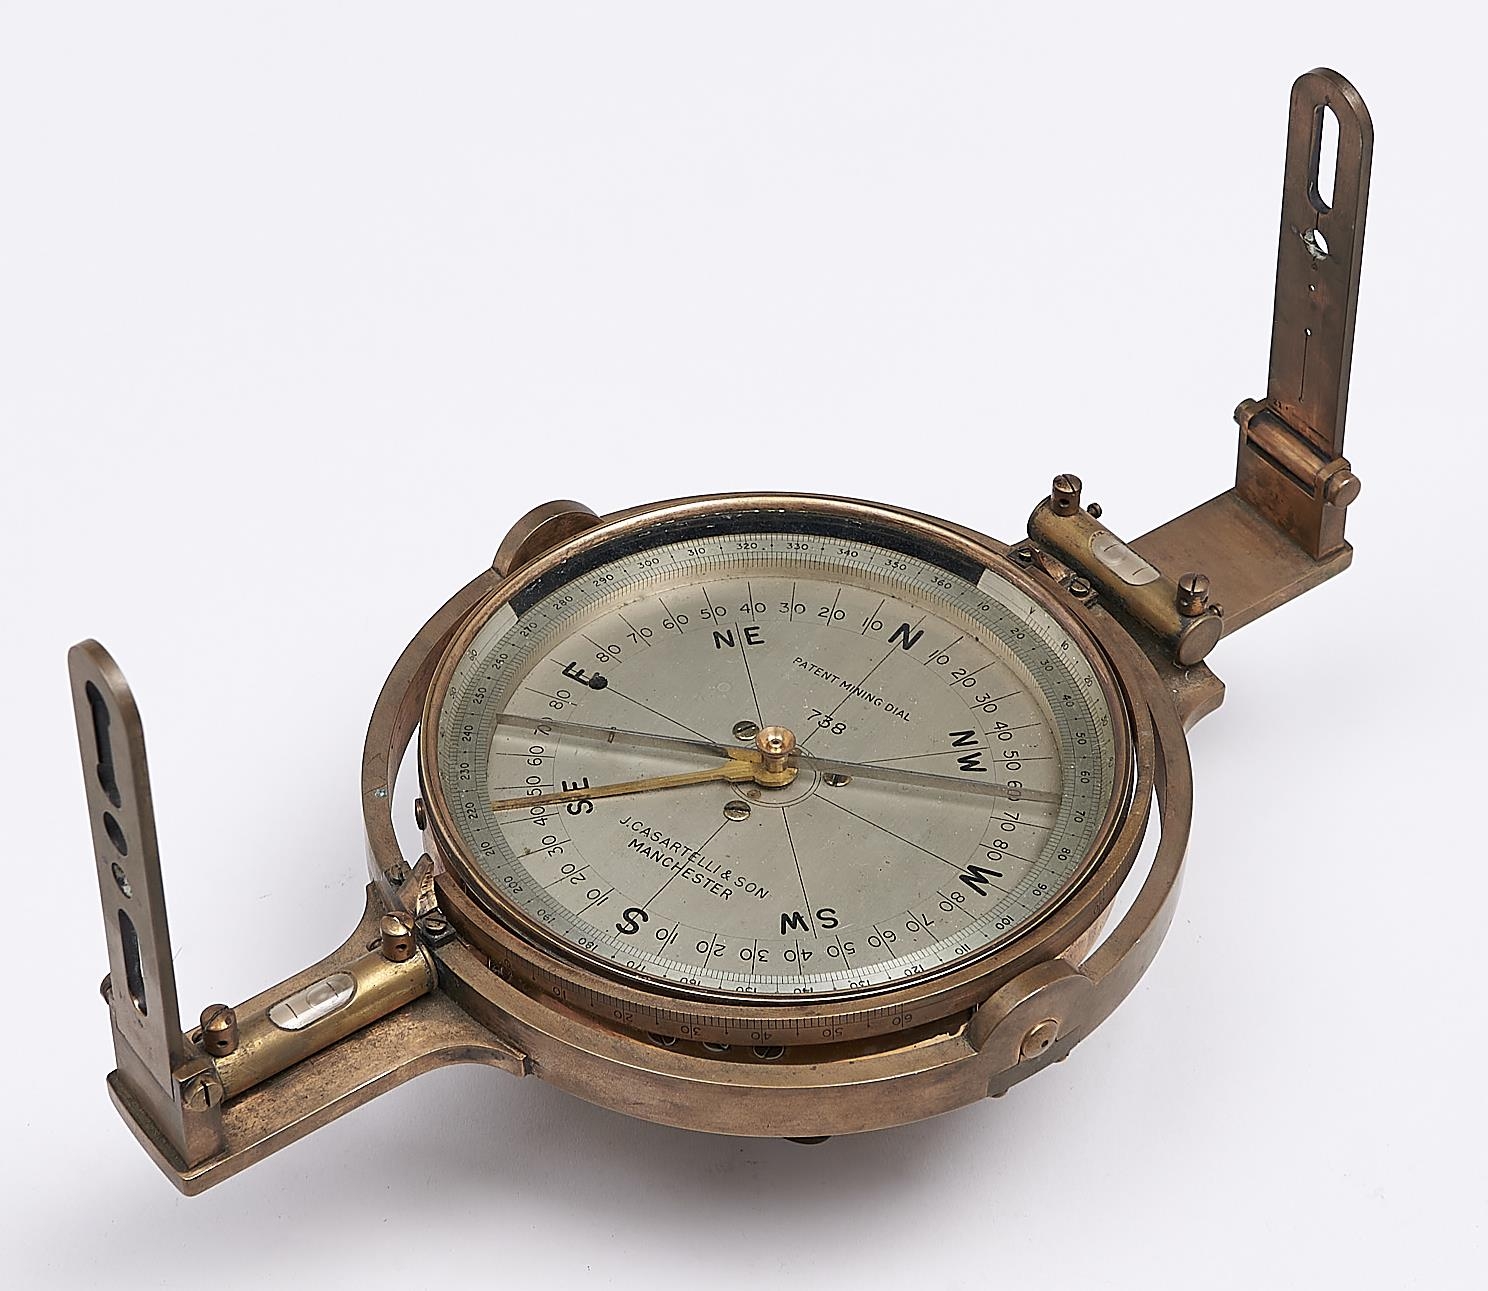 A brass miner's dial, J Casartelli & Son, Manchester, Patent Mining Dial No 738, with finely divided